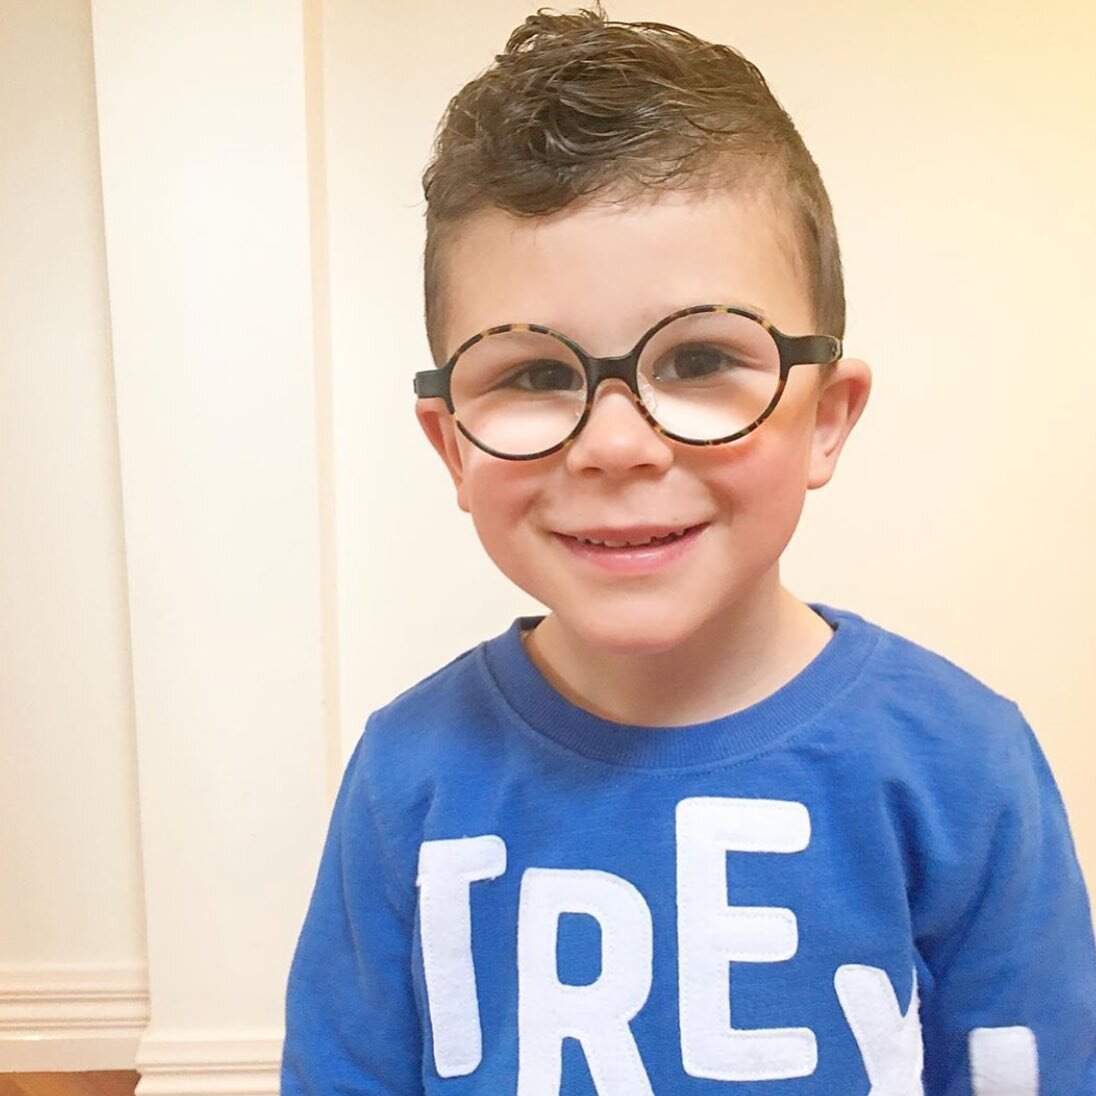 How sweet does Zac look in his Harry Potter-esque glasses 😍

Love how soft the camo looks in this frame - and Zac absolutely rocks them! Thank you for sharing @hollie.ismaili 💖🤓

#tomatoglasses #tomatoglassesaustralia #kids #kidseyewear #kidsoptic